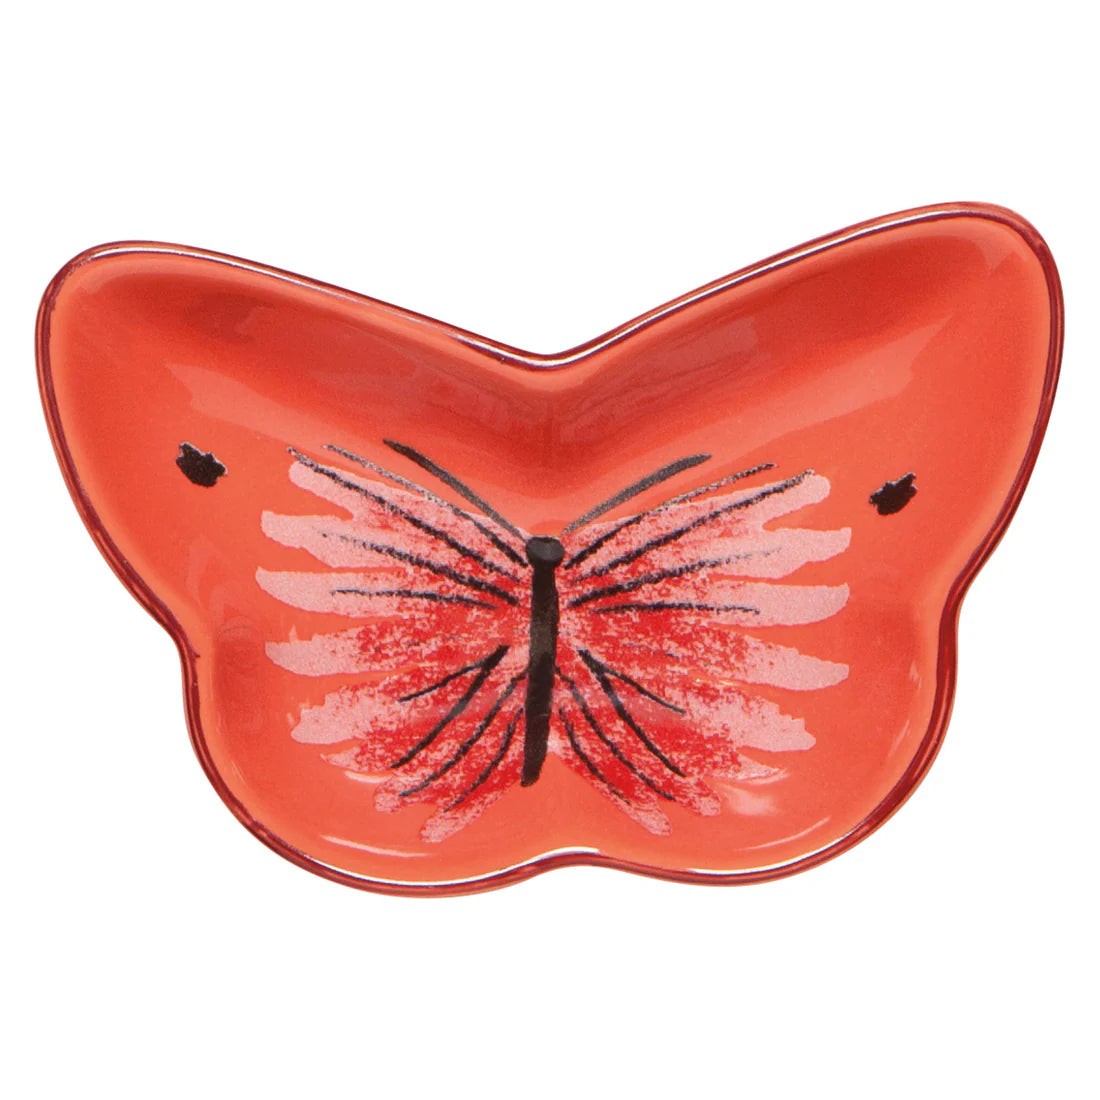 Pinch Bowl Butterfly